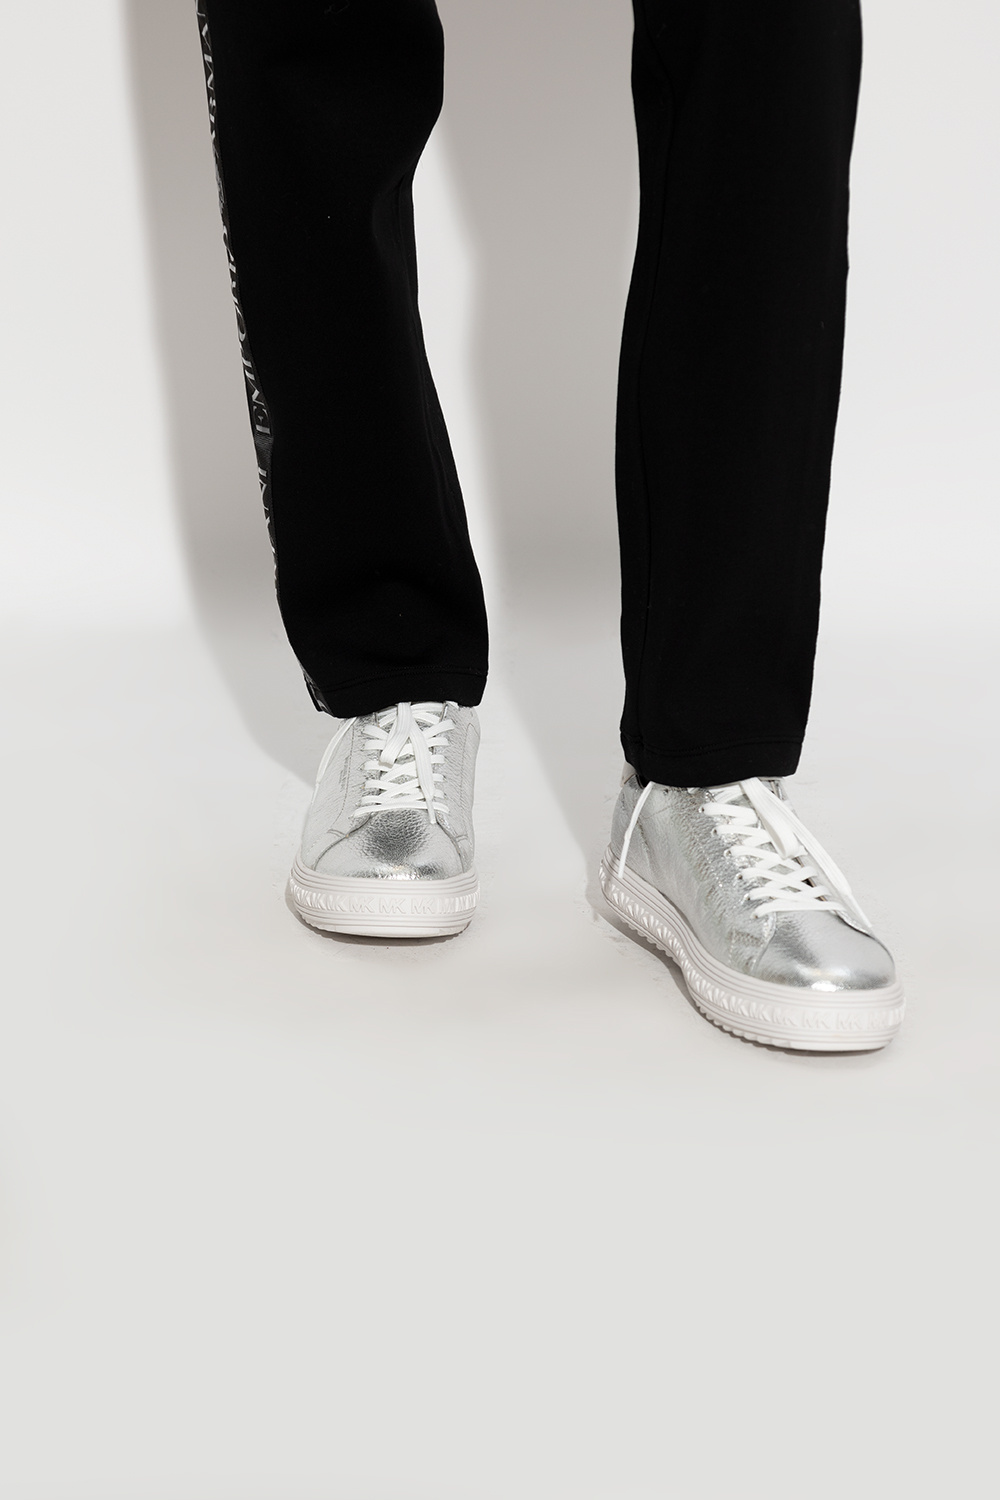 Discover collection sneakers Grove by Michael Kors now available online